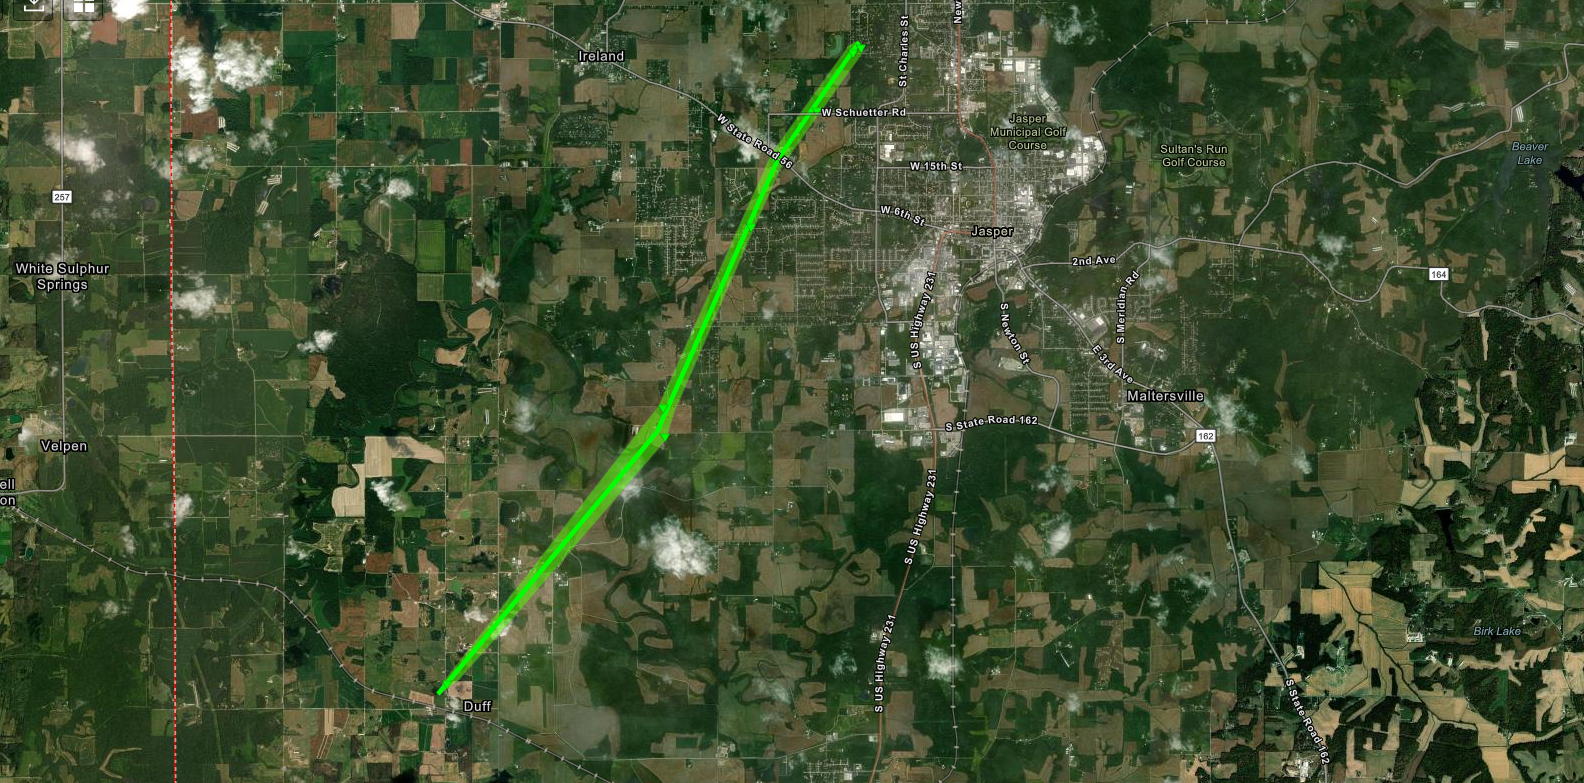 Track Map for Dubois County, Indiana tornado March 3, 2023